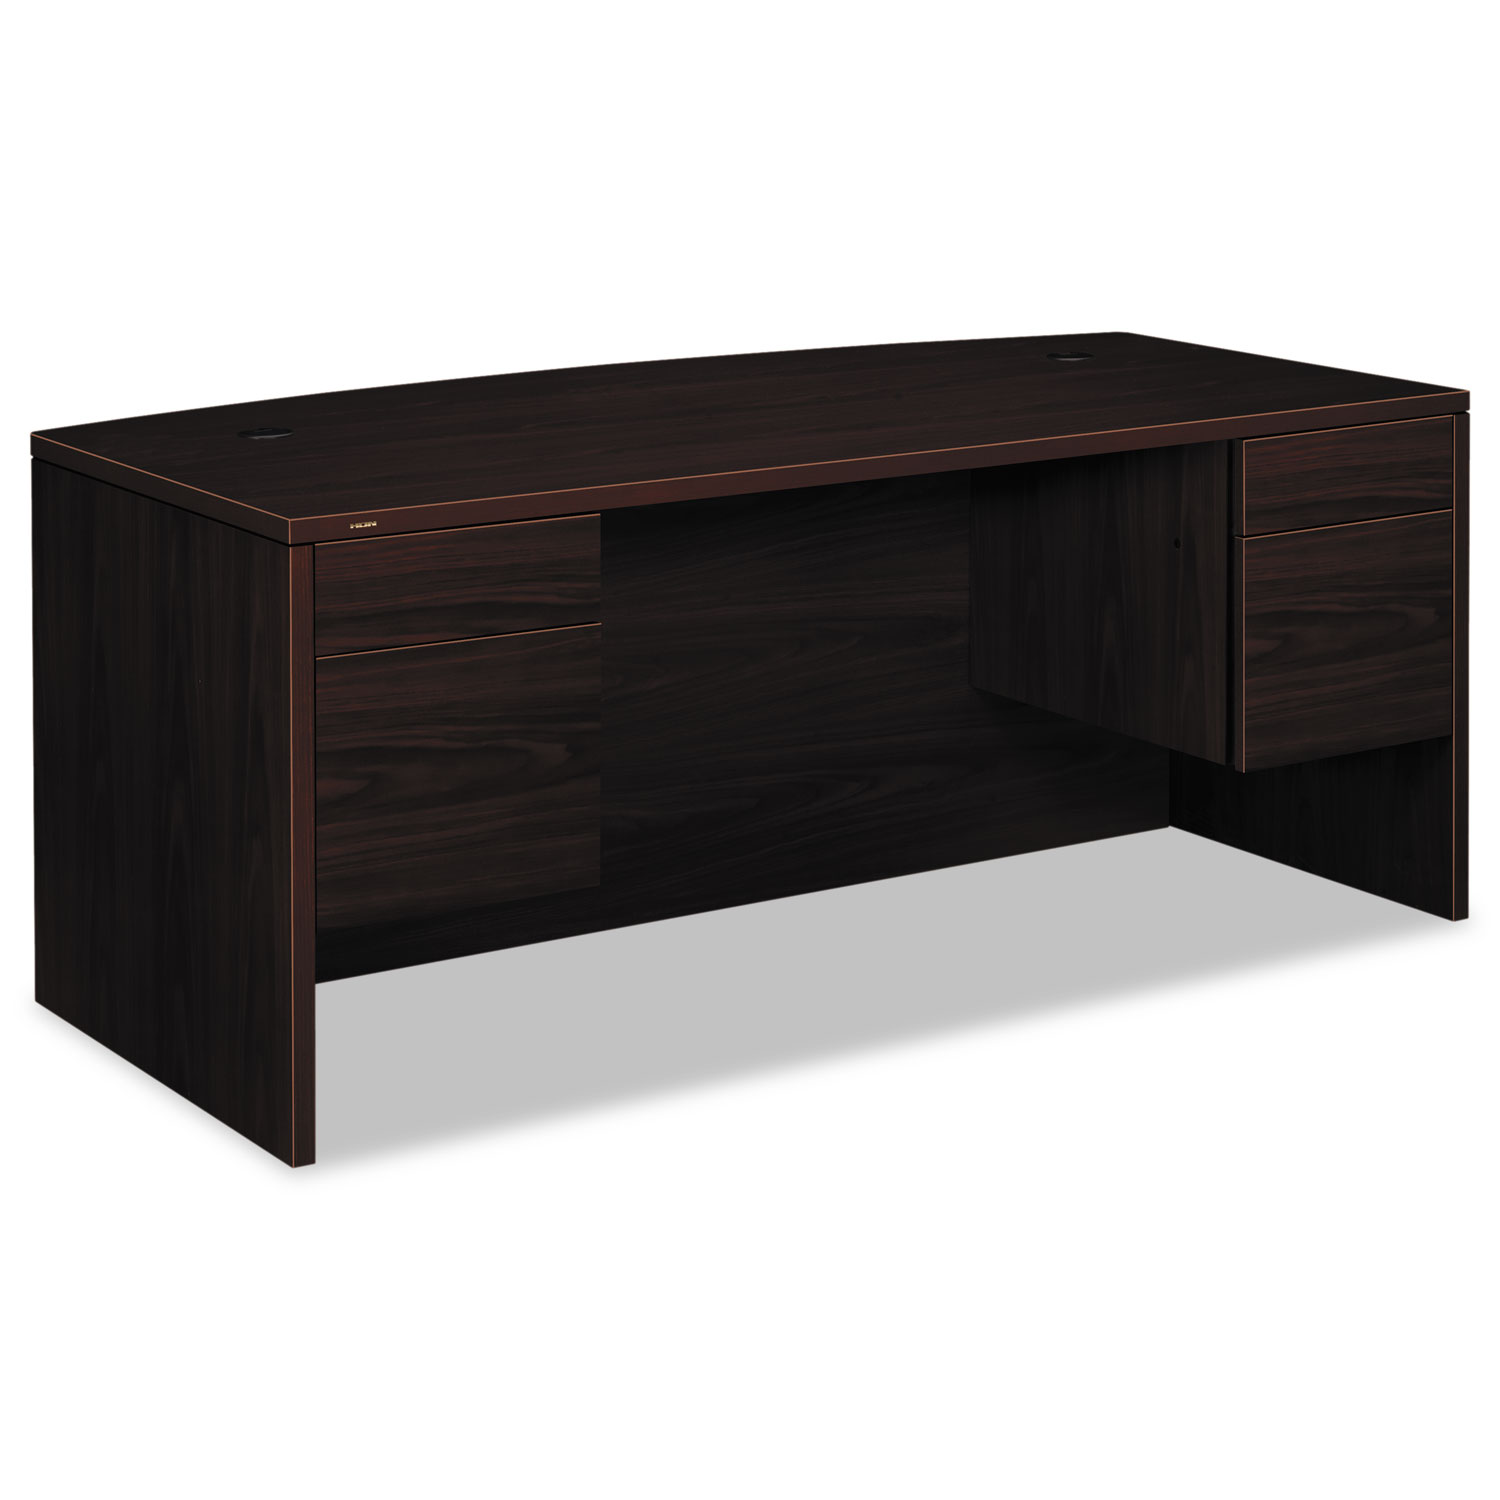 10500 Series Bow Front Desk, 3/4-Height Dbl Peds, 72 x 36 x 29-1/2, Mahogany